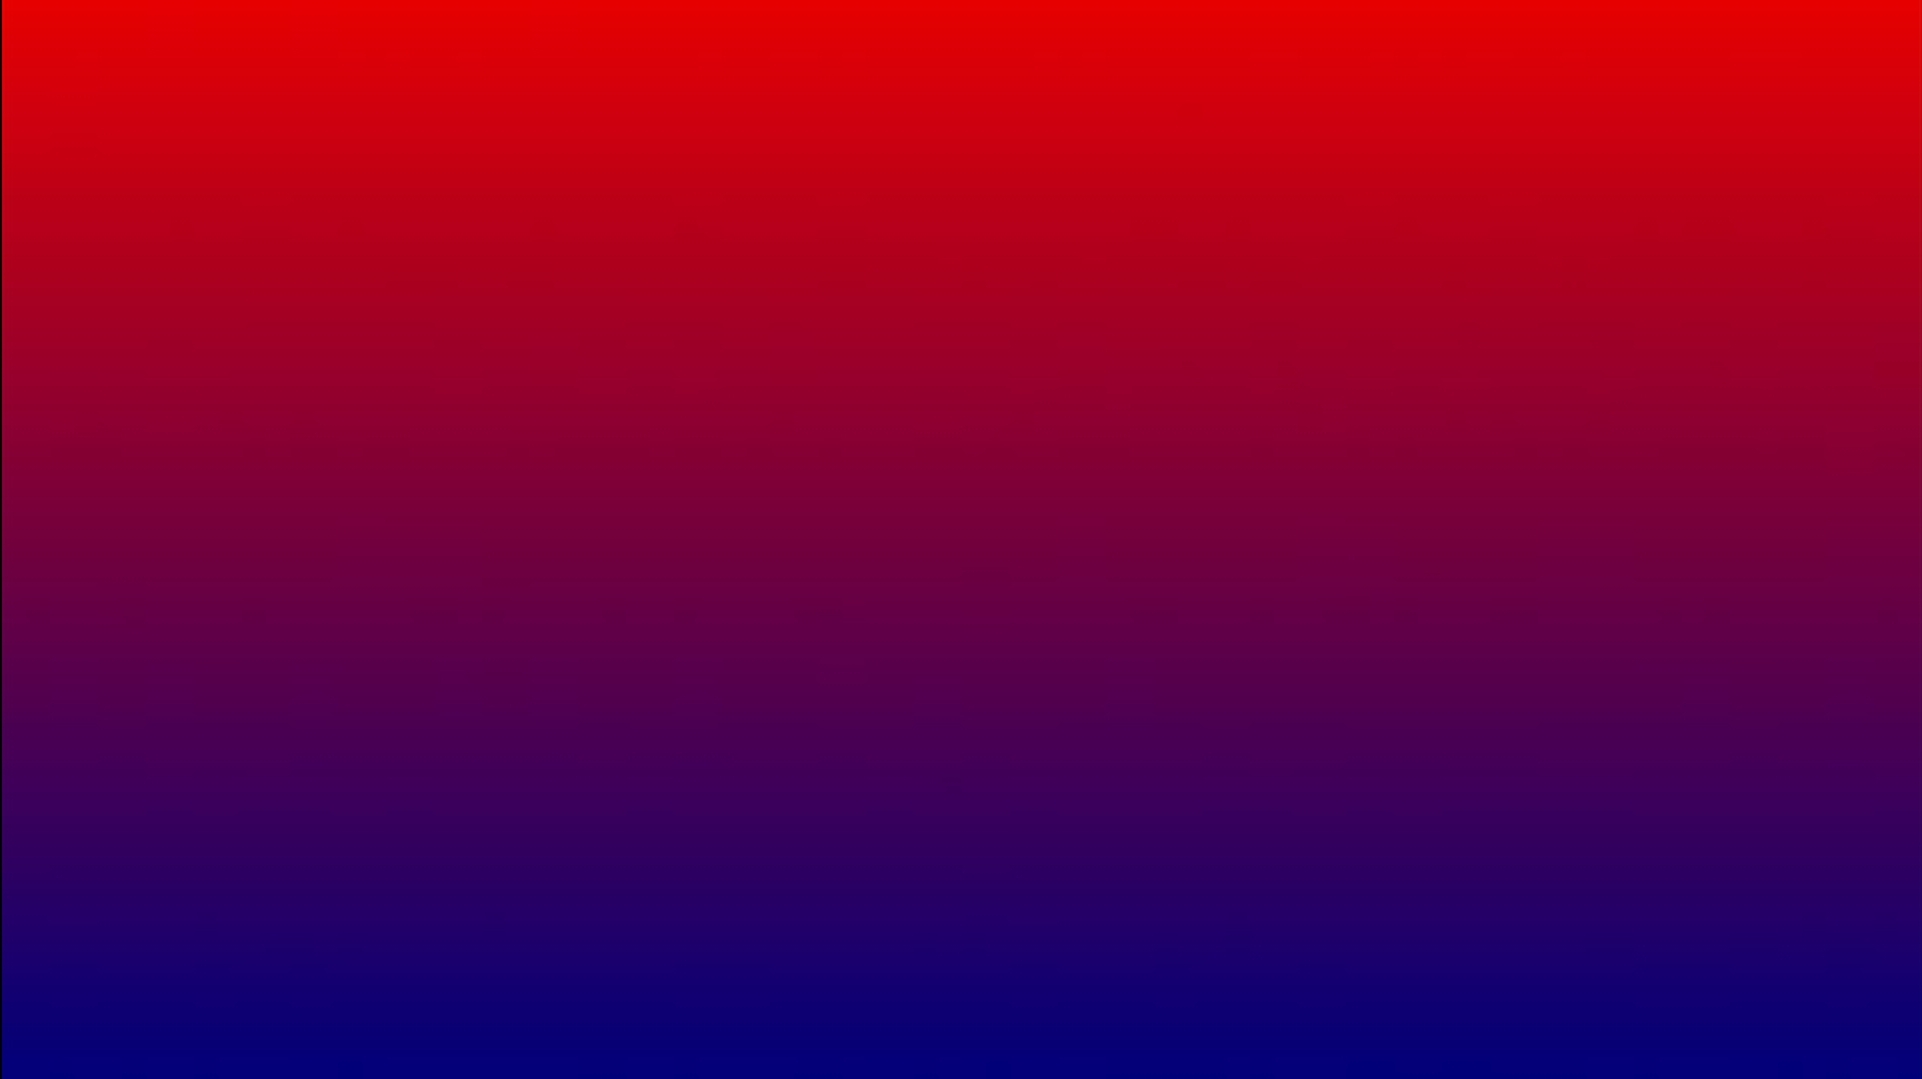 Red and Blue Background Blank Meme Template